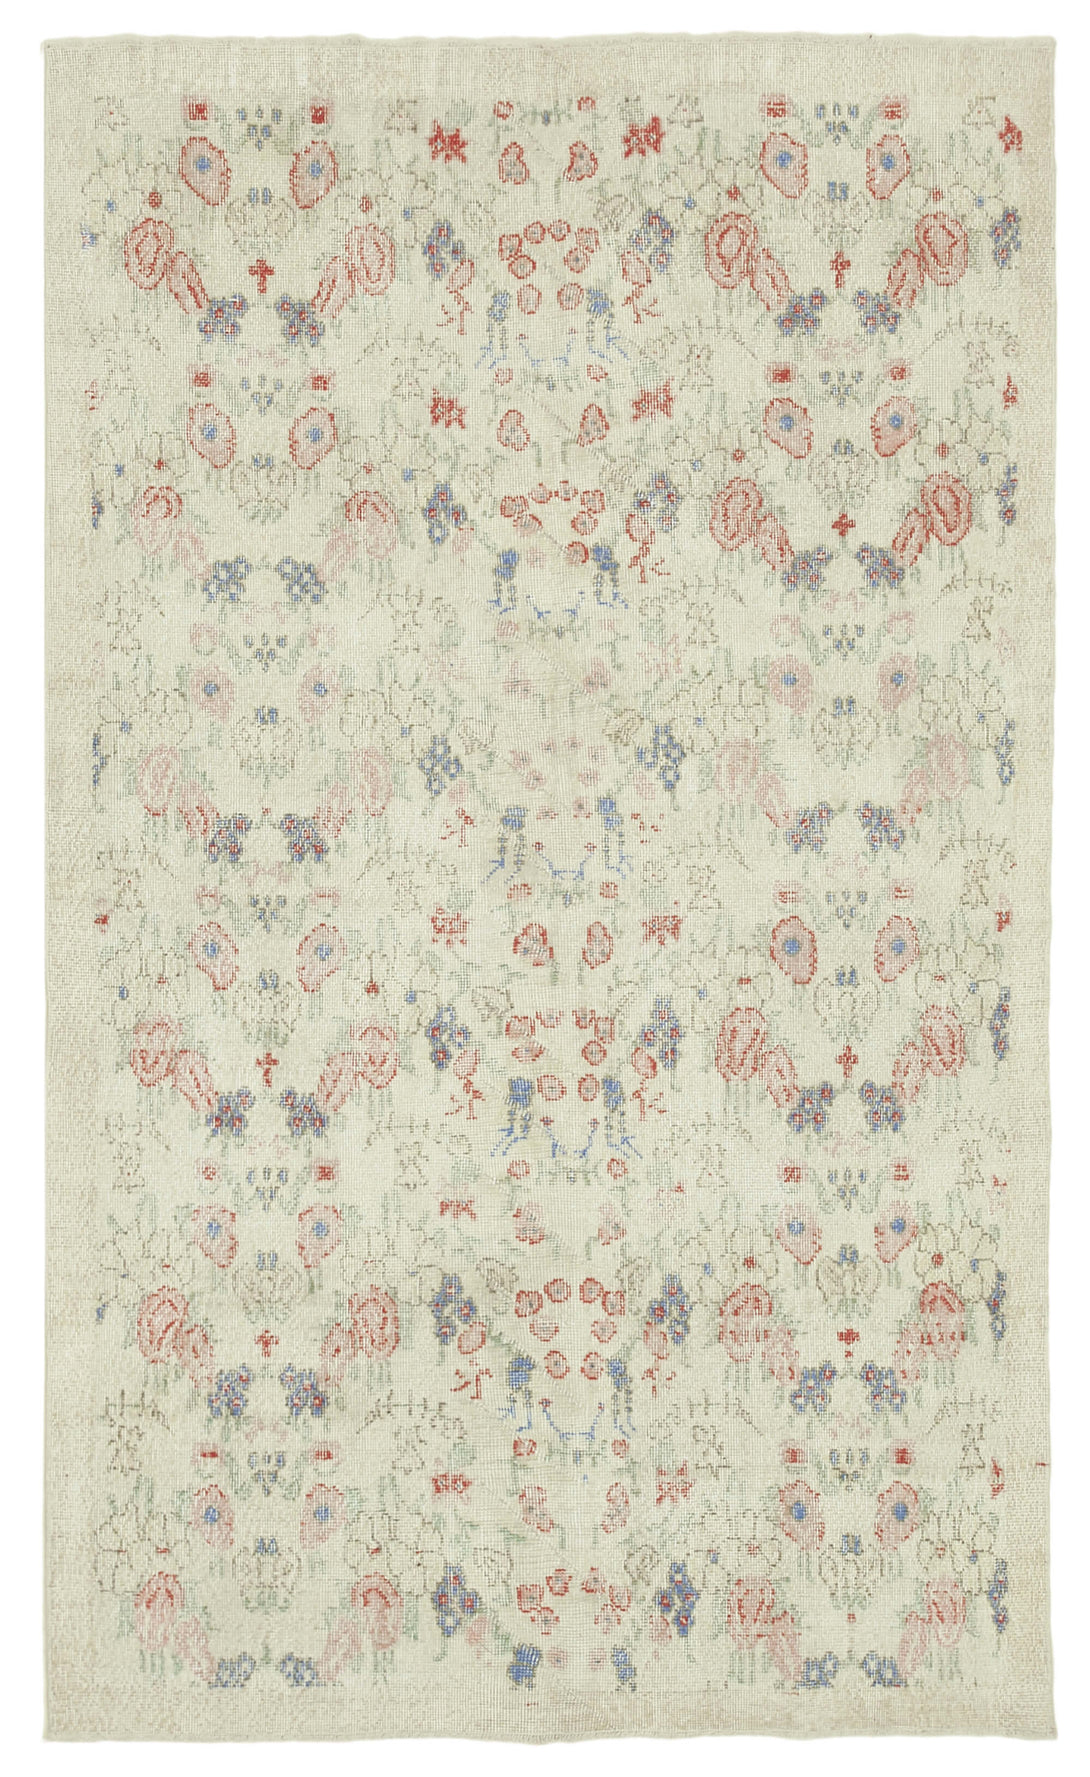 Handmade White Wash Area Rug > Design# OL-AC-38933 > Size: 5'-1" x 8'-8", Carpet Culture Rugs, Handmade Rugs, NYC Rugs, New Rugs, Shop Rugs, Rug Store, Outlet Rugs, SoHo Rugs, Rugs in USA